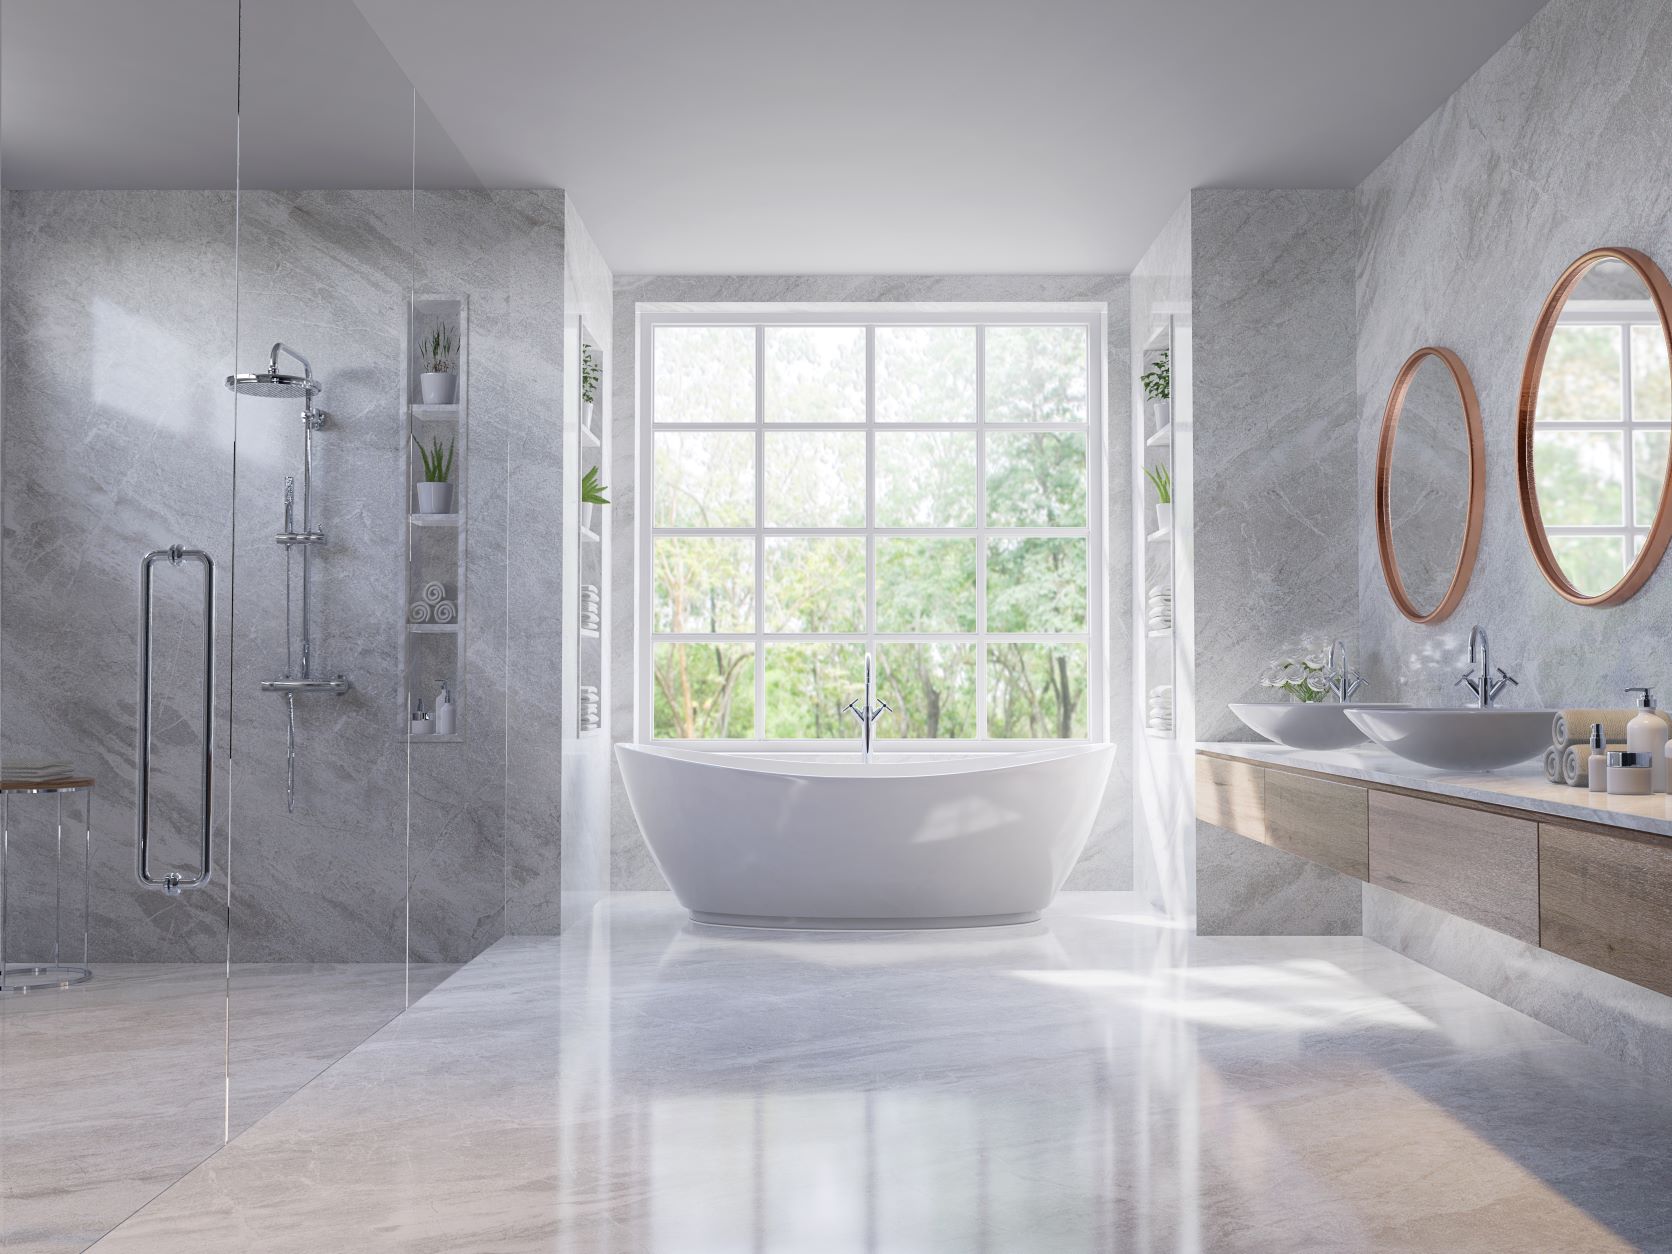 Tips on Creating the Bathroom of Your Dreams